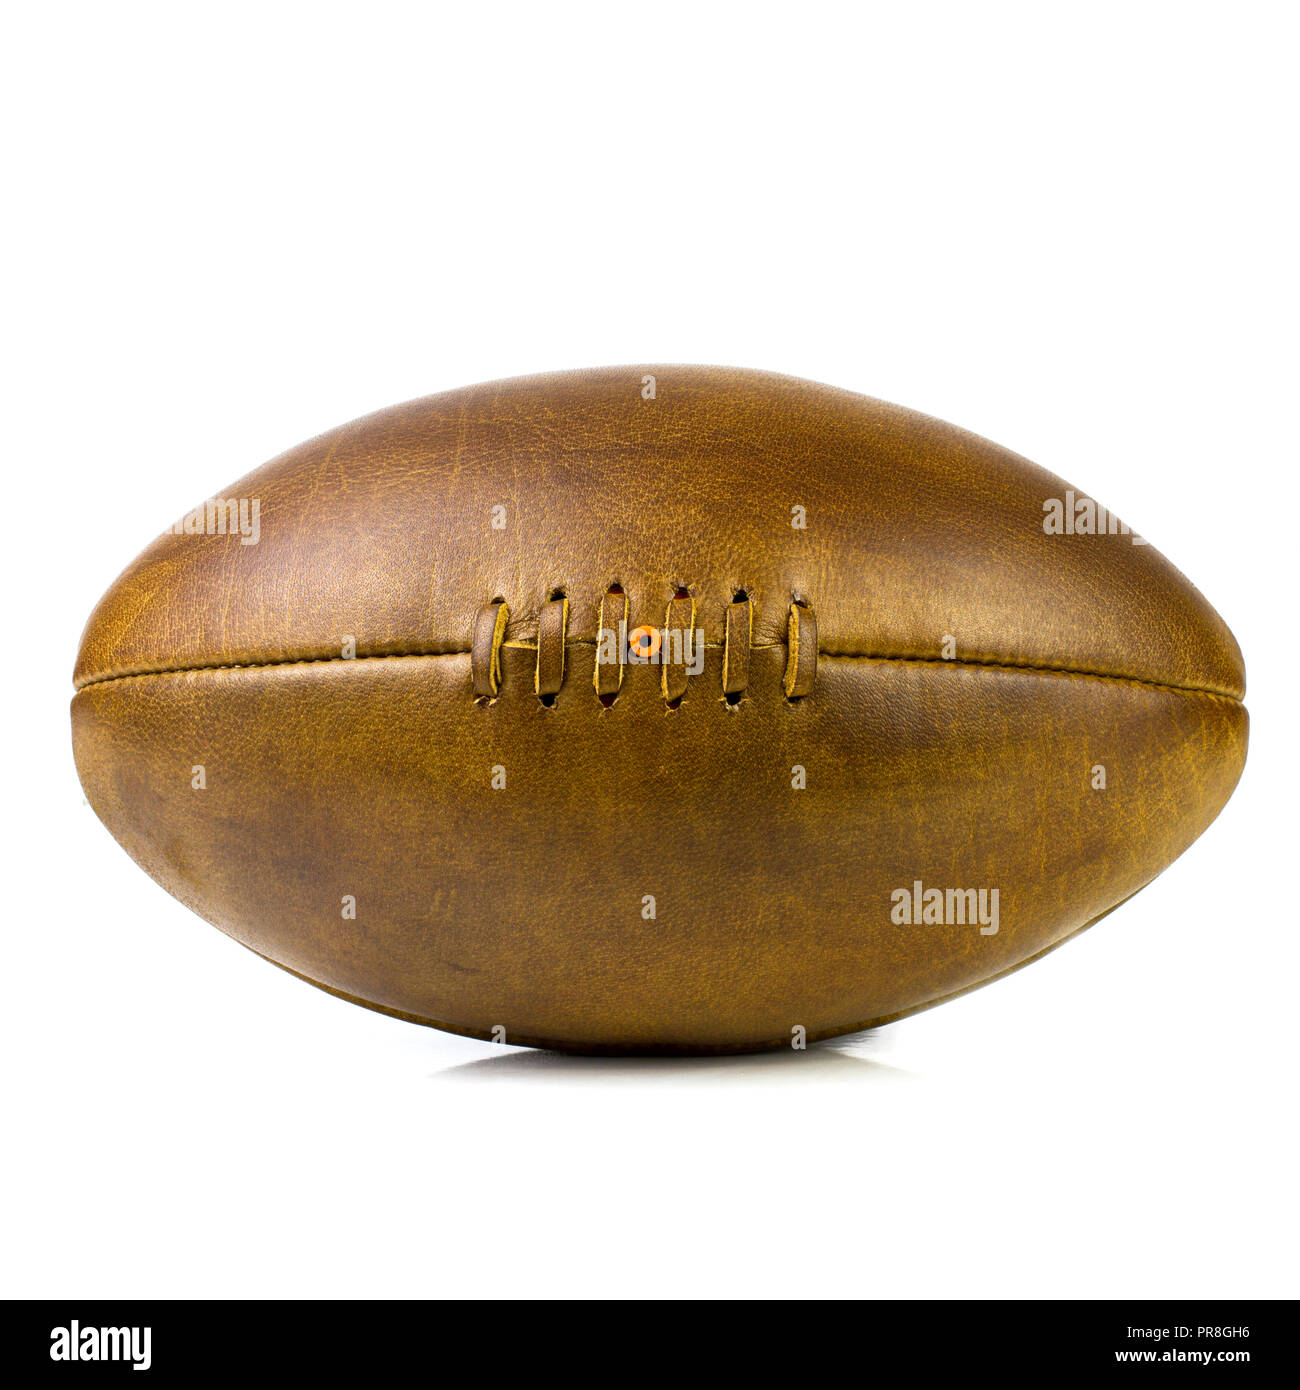 vintage lace up leather rugby soccer ball Stock Photo